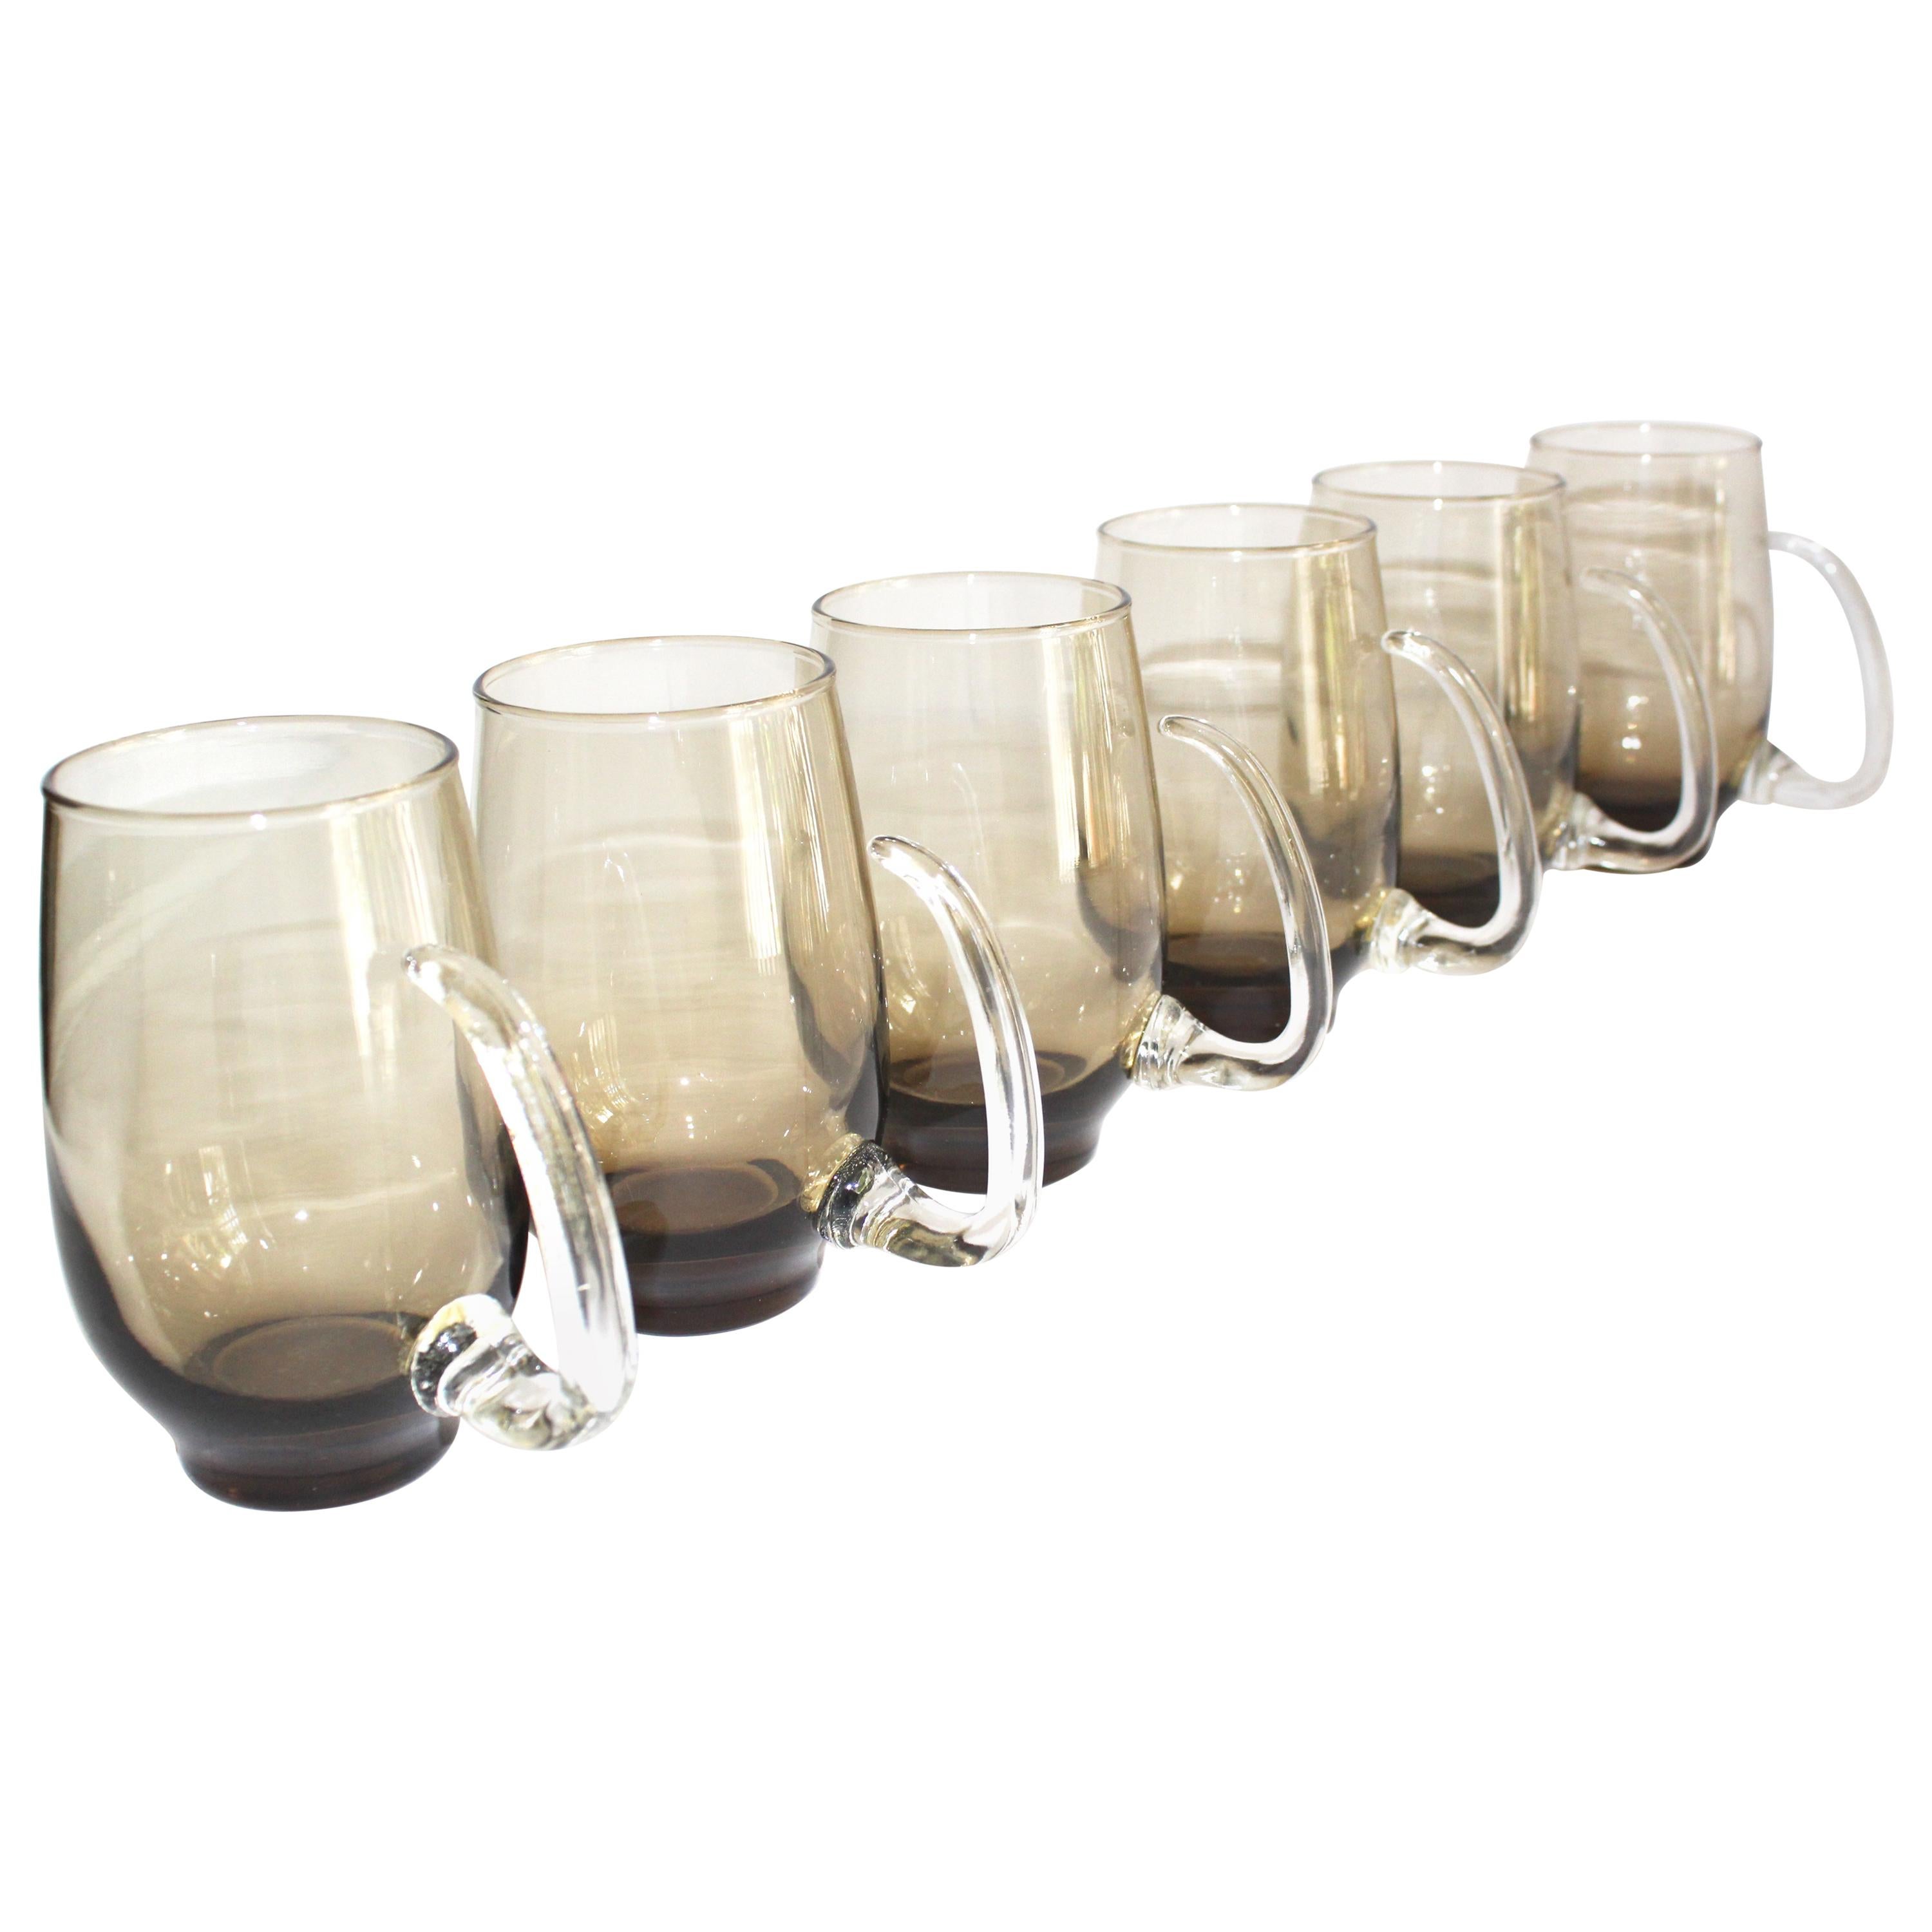 Set of Six Mid-Century Modern Tinted Glass Mugs by Libbey Glass Co.